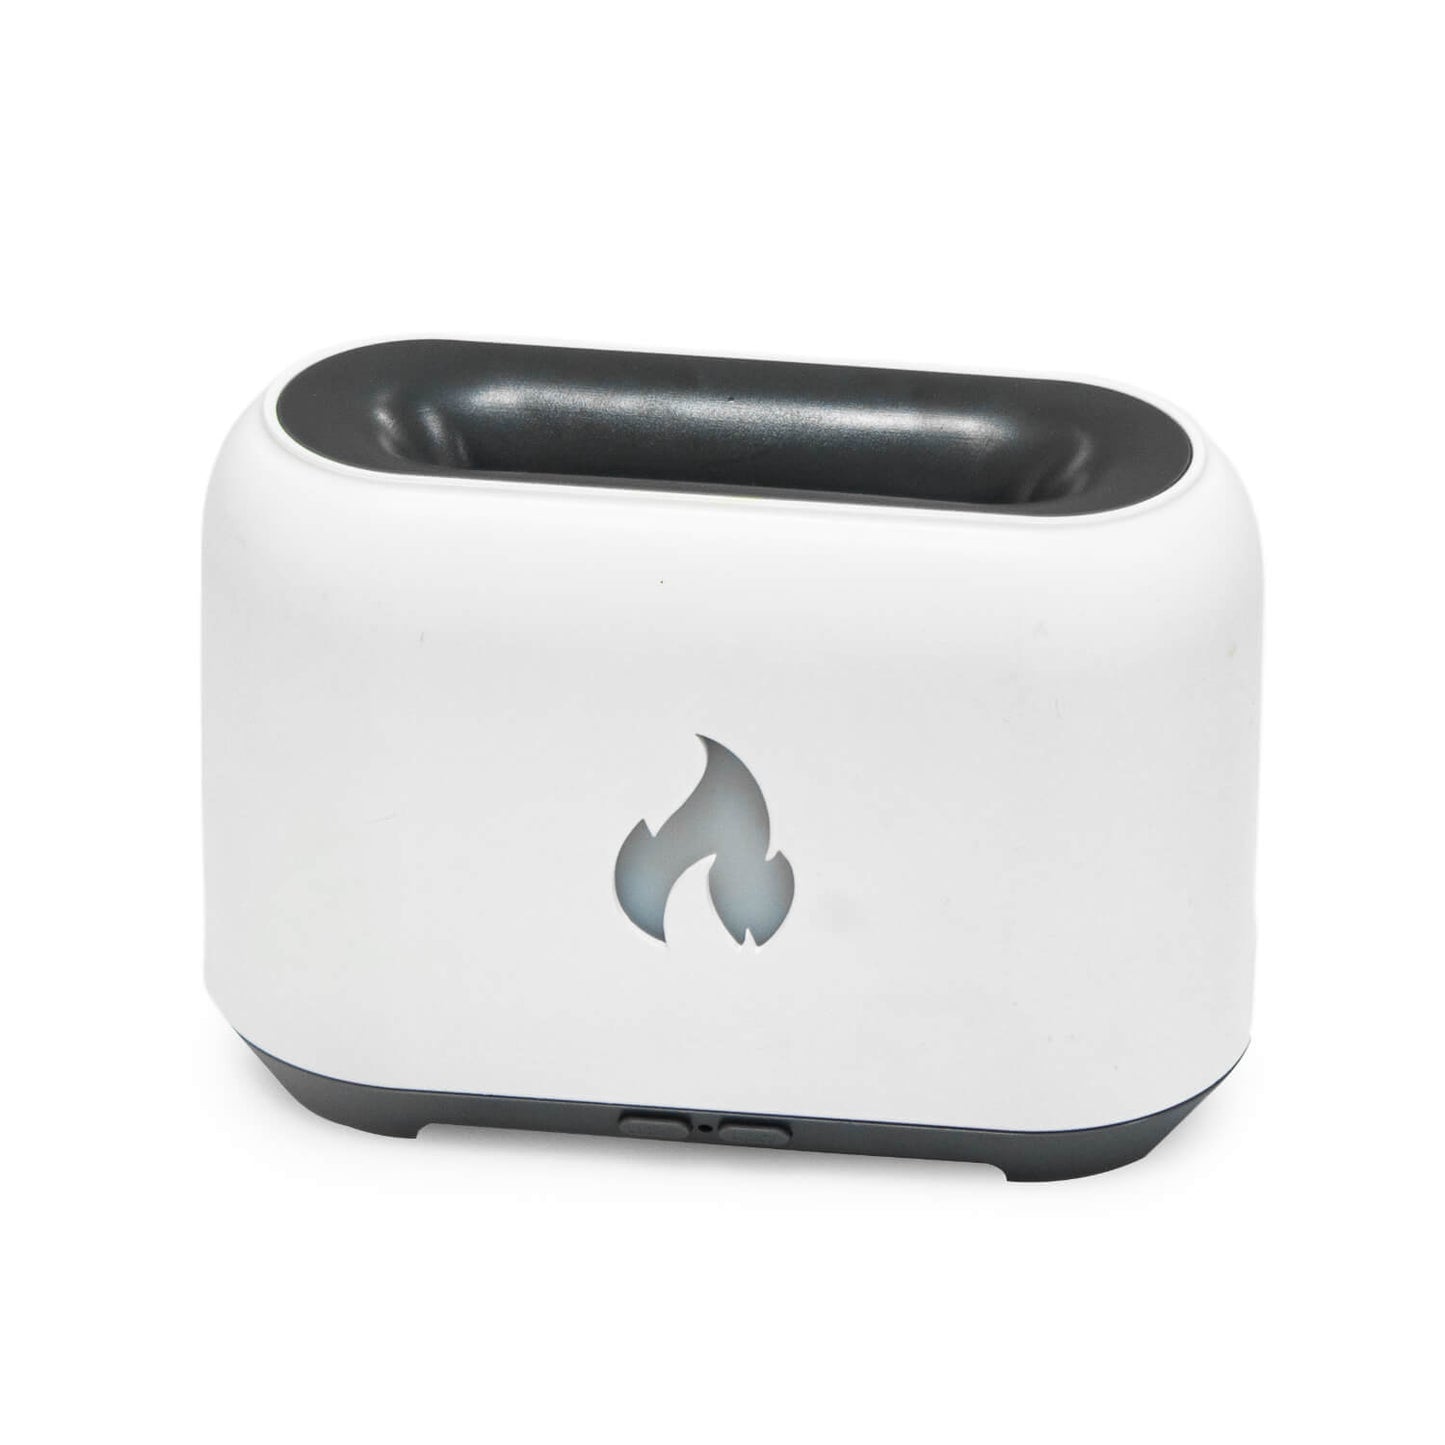 Explore the sleek and modern design of our Colorful Flame Aroma Humidifier.